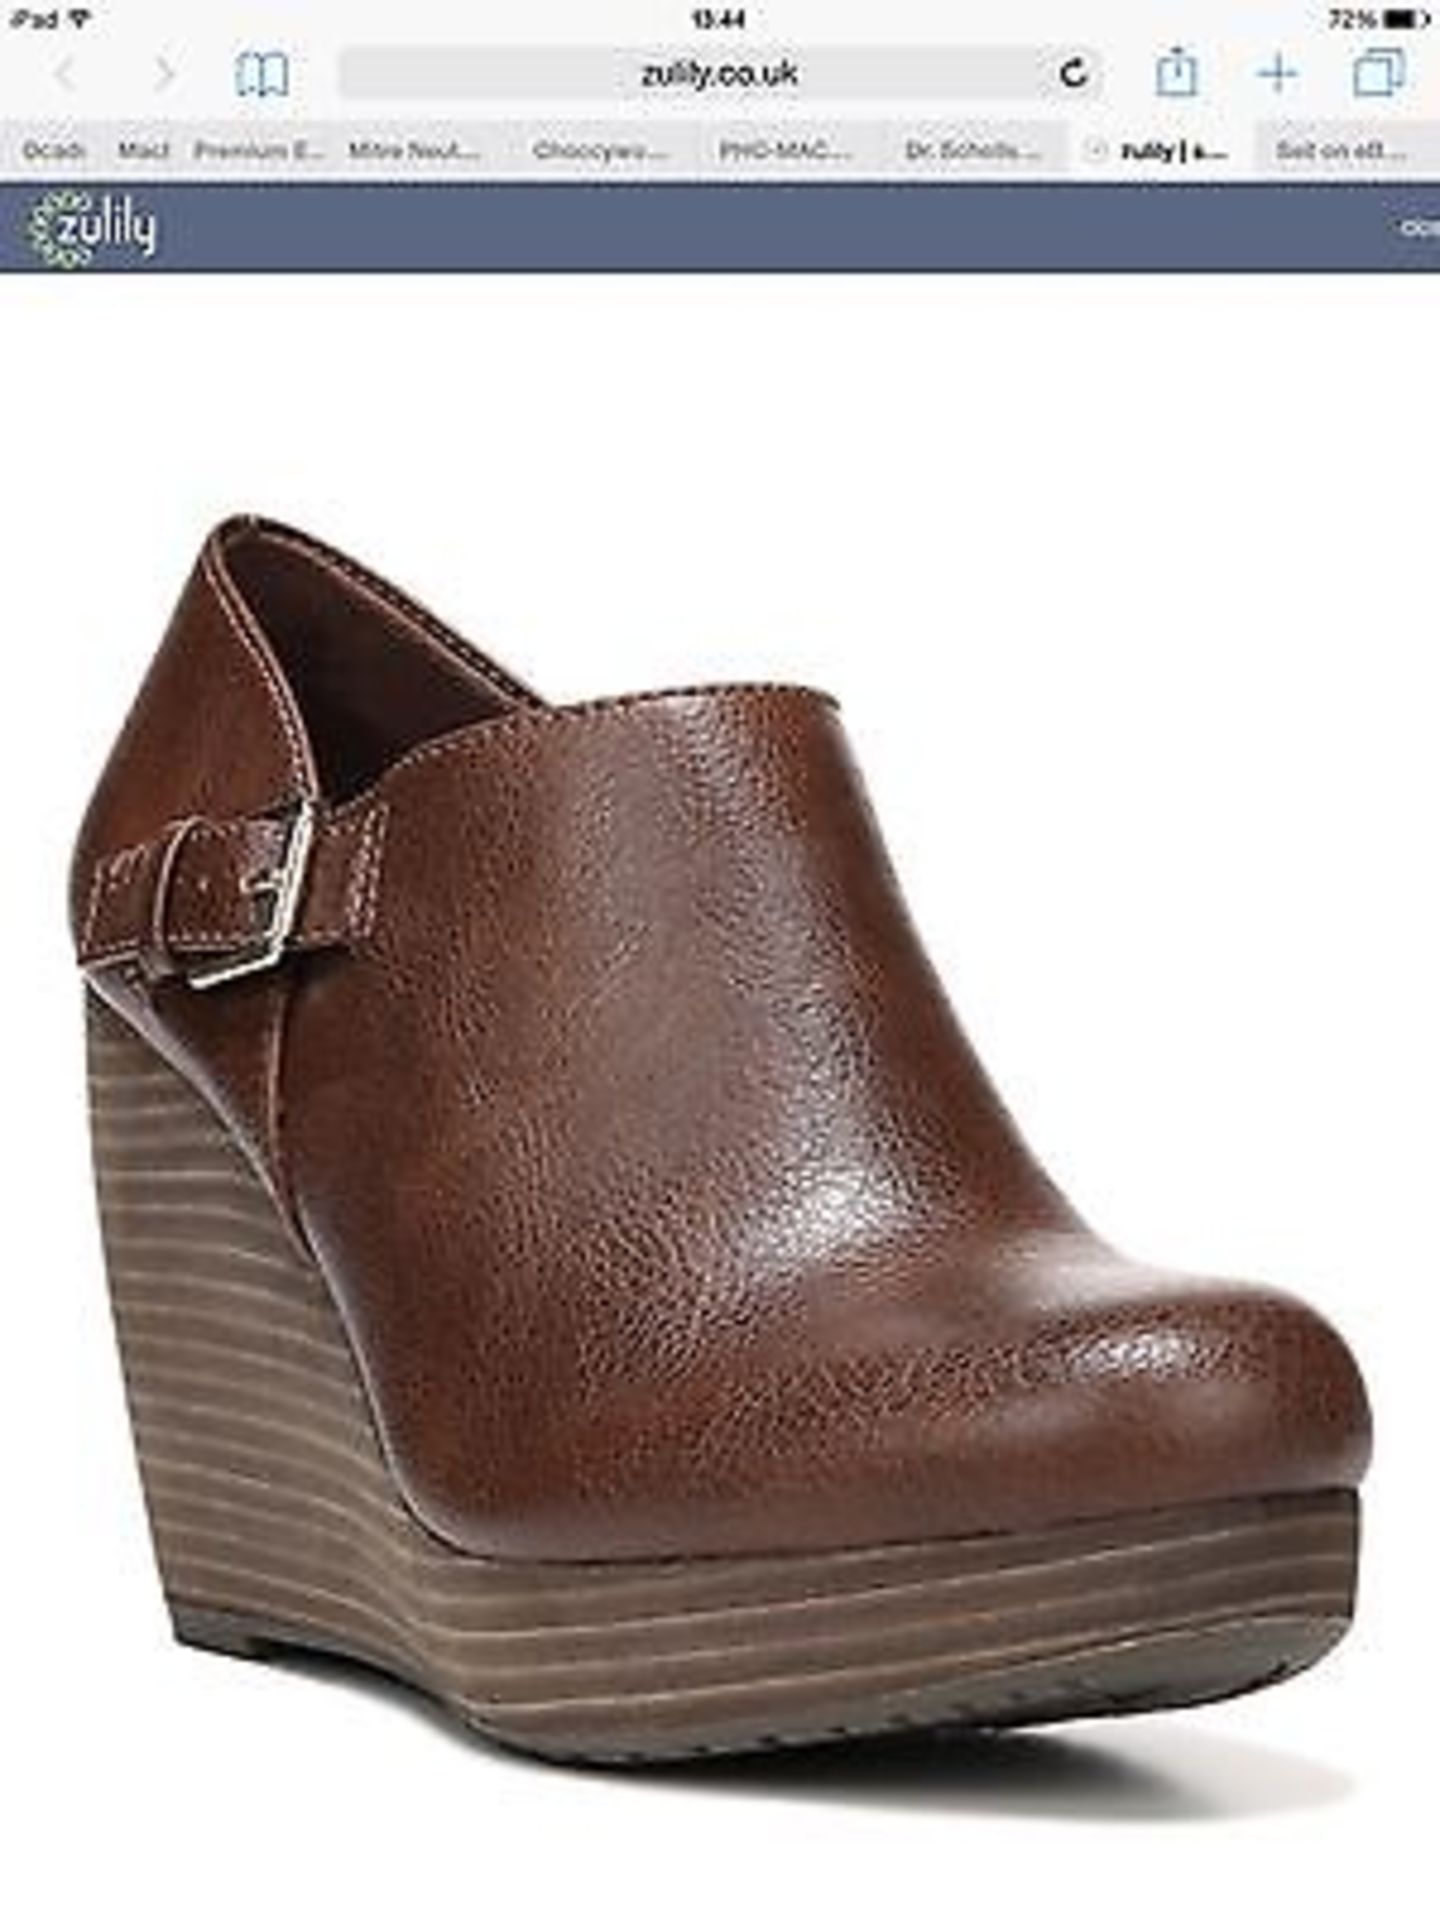 Dr Scholl's Whiskey Tribune Honor Bootie, Size 7.5, RRP £ (New with box) [Ref: ]